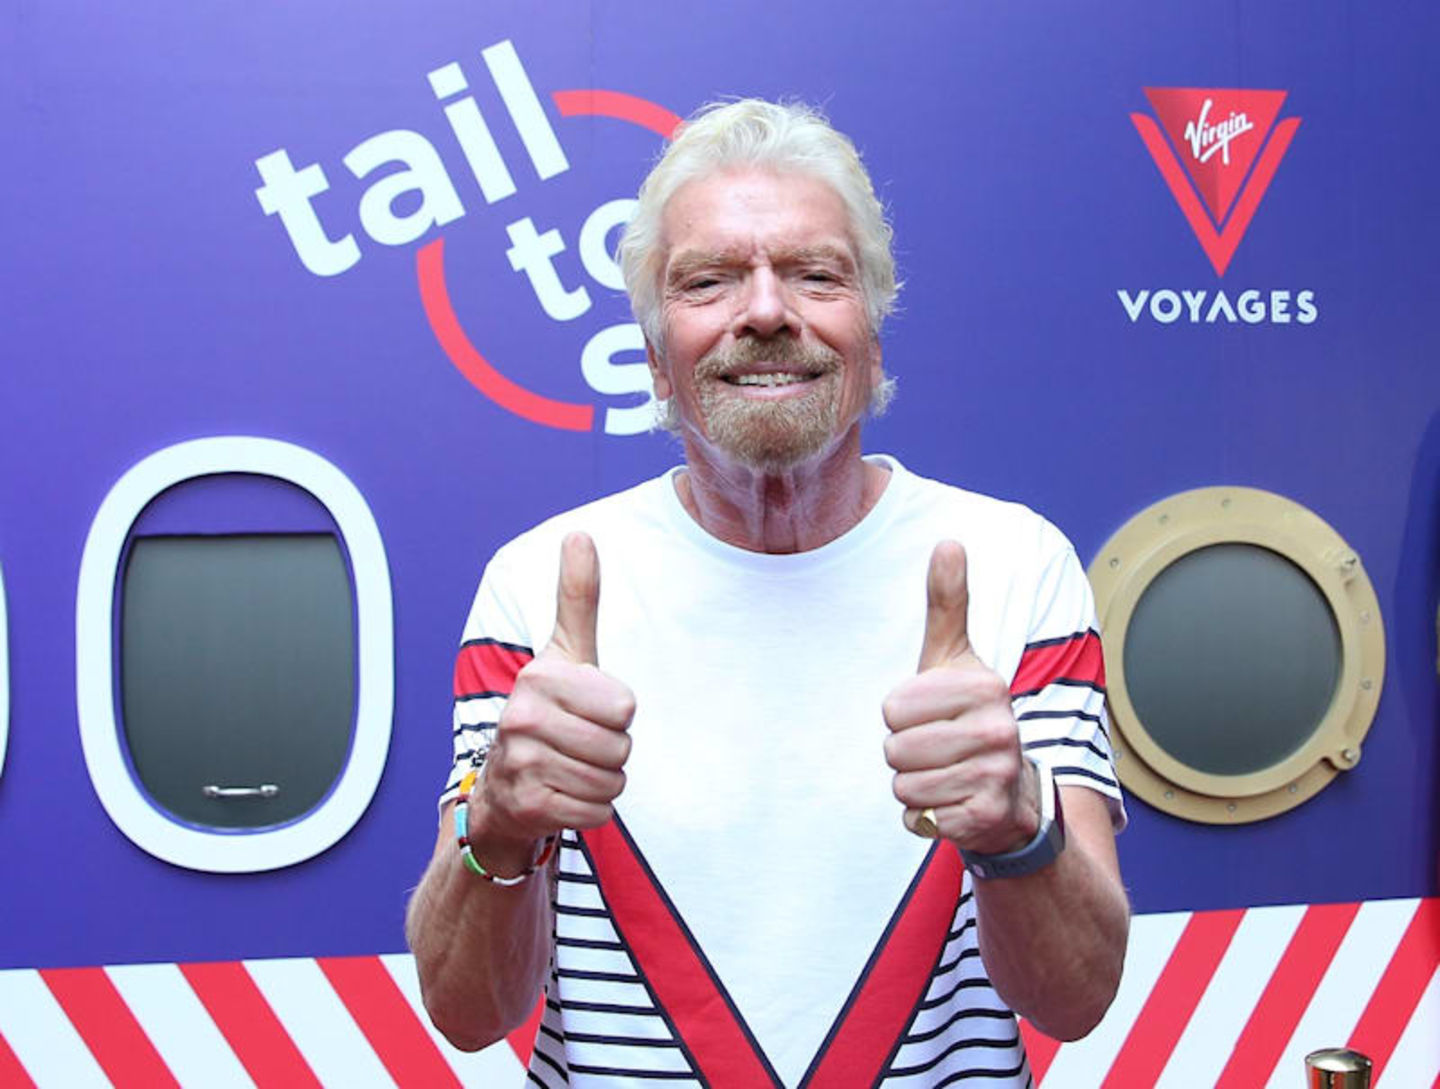 Richard Branson wearing a Virgin Voyages uniform shirt smiling with his thumbs up